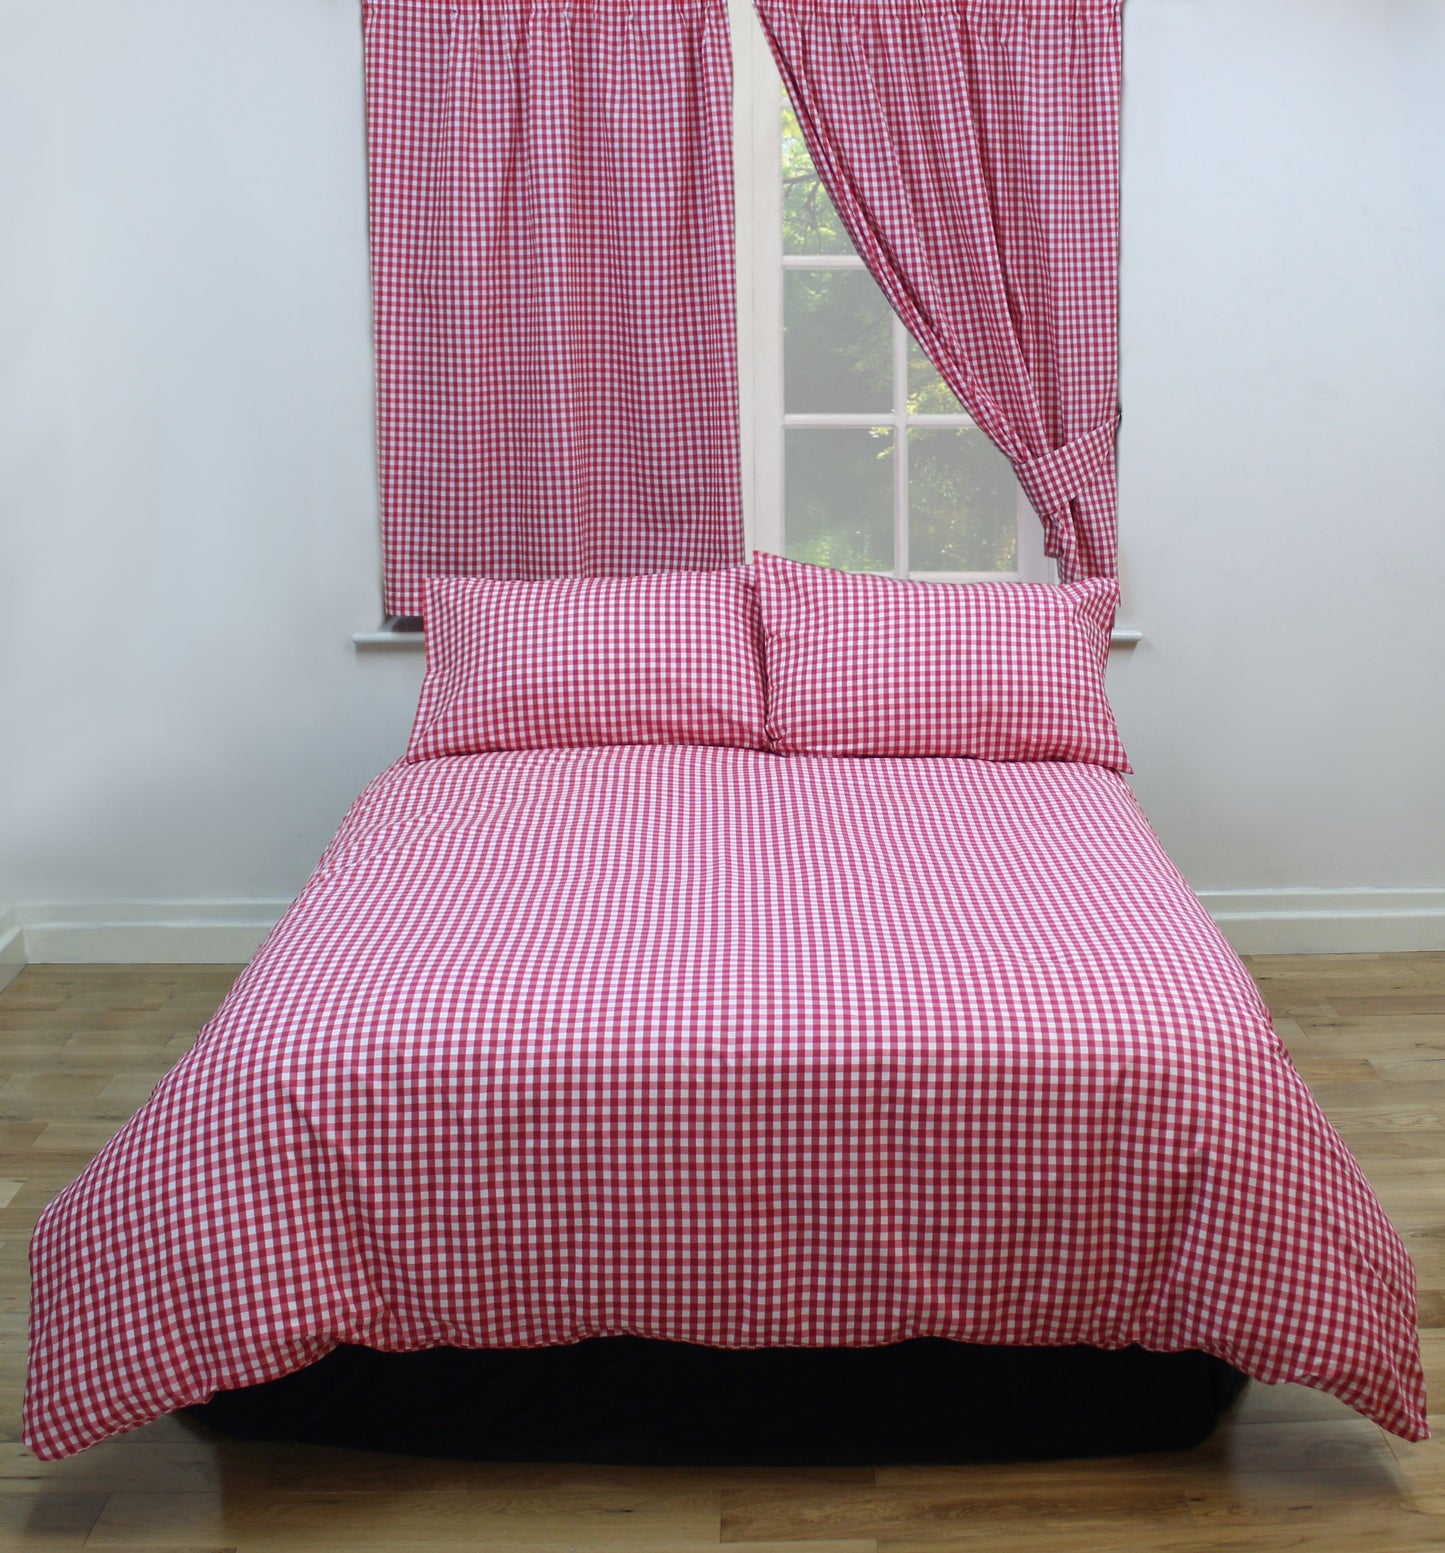 King Size Gingham Check Red Cherry White Duvet Cover Set 100% Natural Cotton